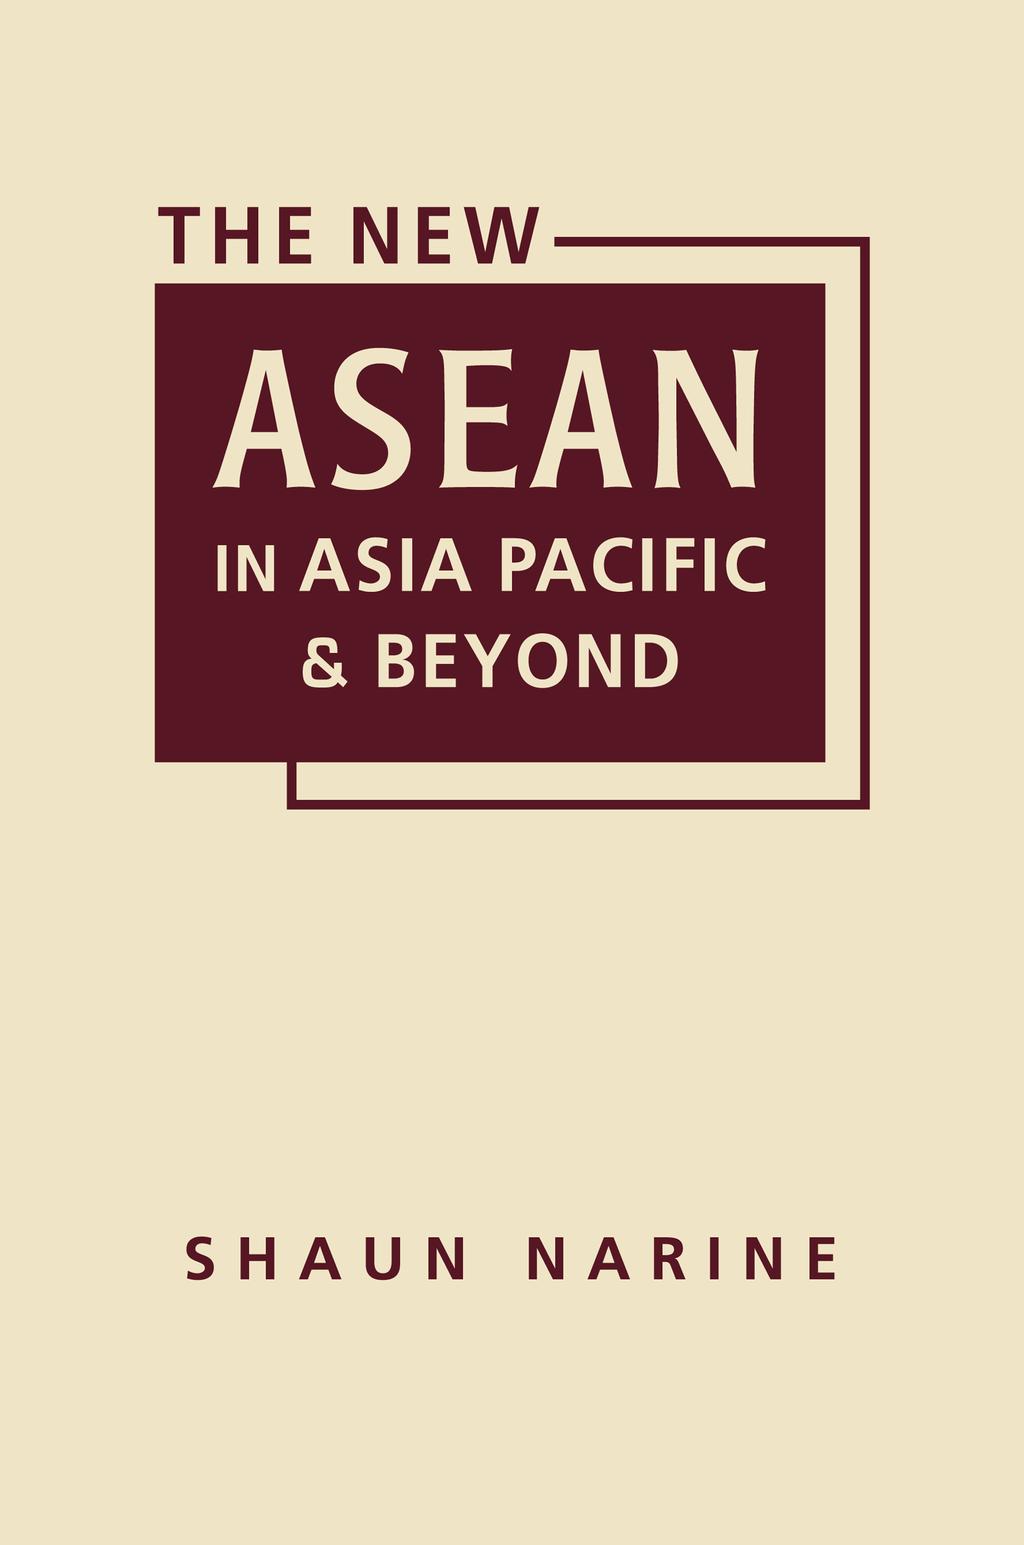 EXCERPTED FROM The New ASEAN in Asia Pacific and Beyond Shaun Narine Copyright 2018 ISBN: 978-1-62637-689-2 hc 1800 30th Street, Suite 314